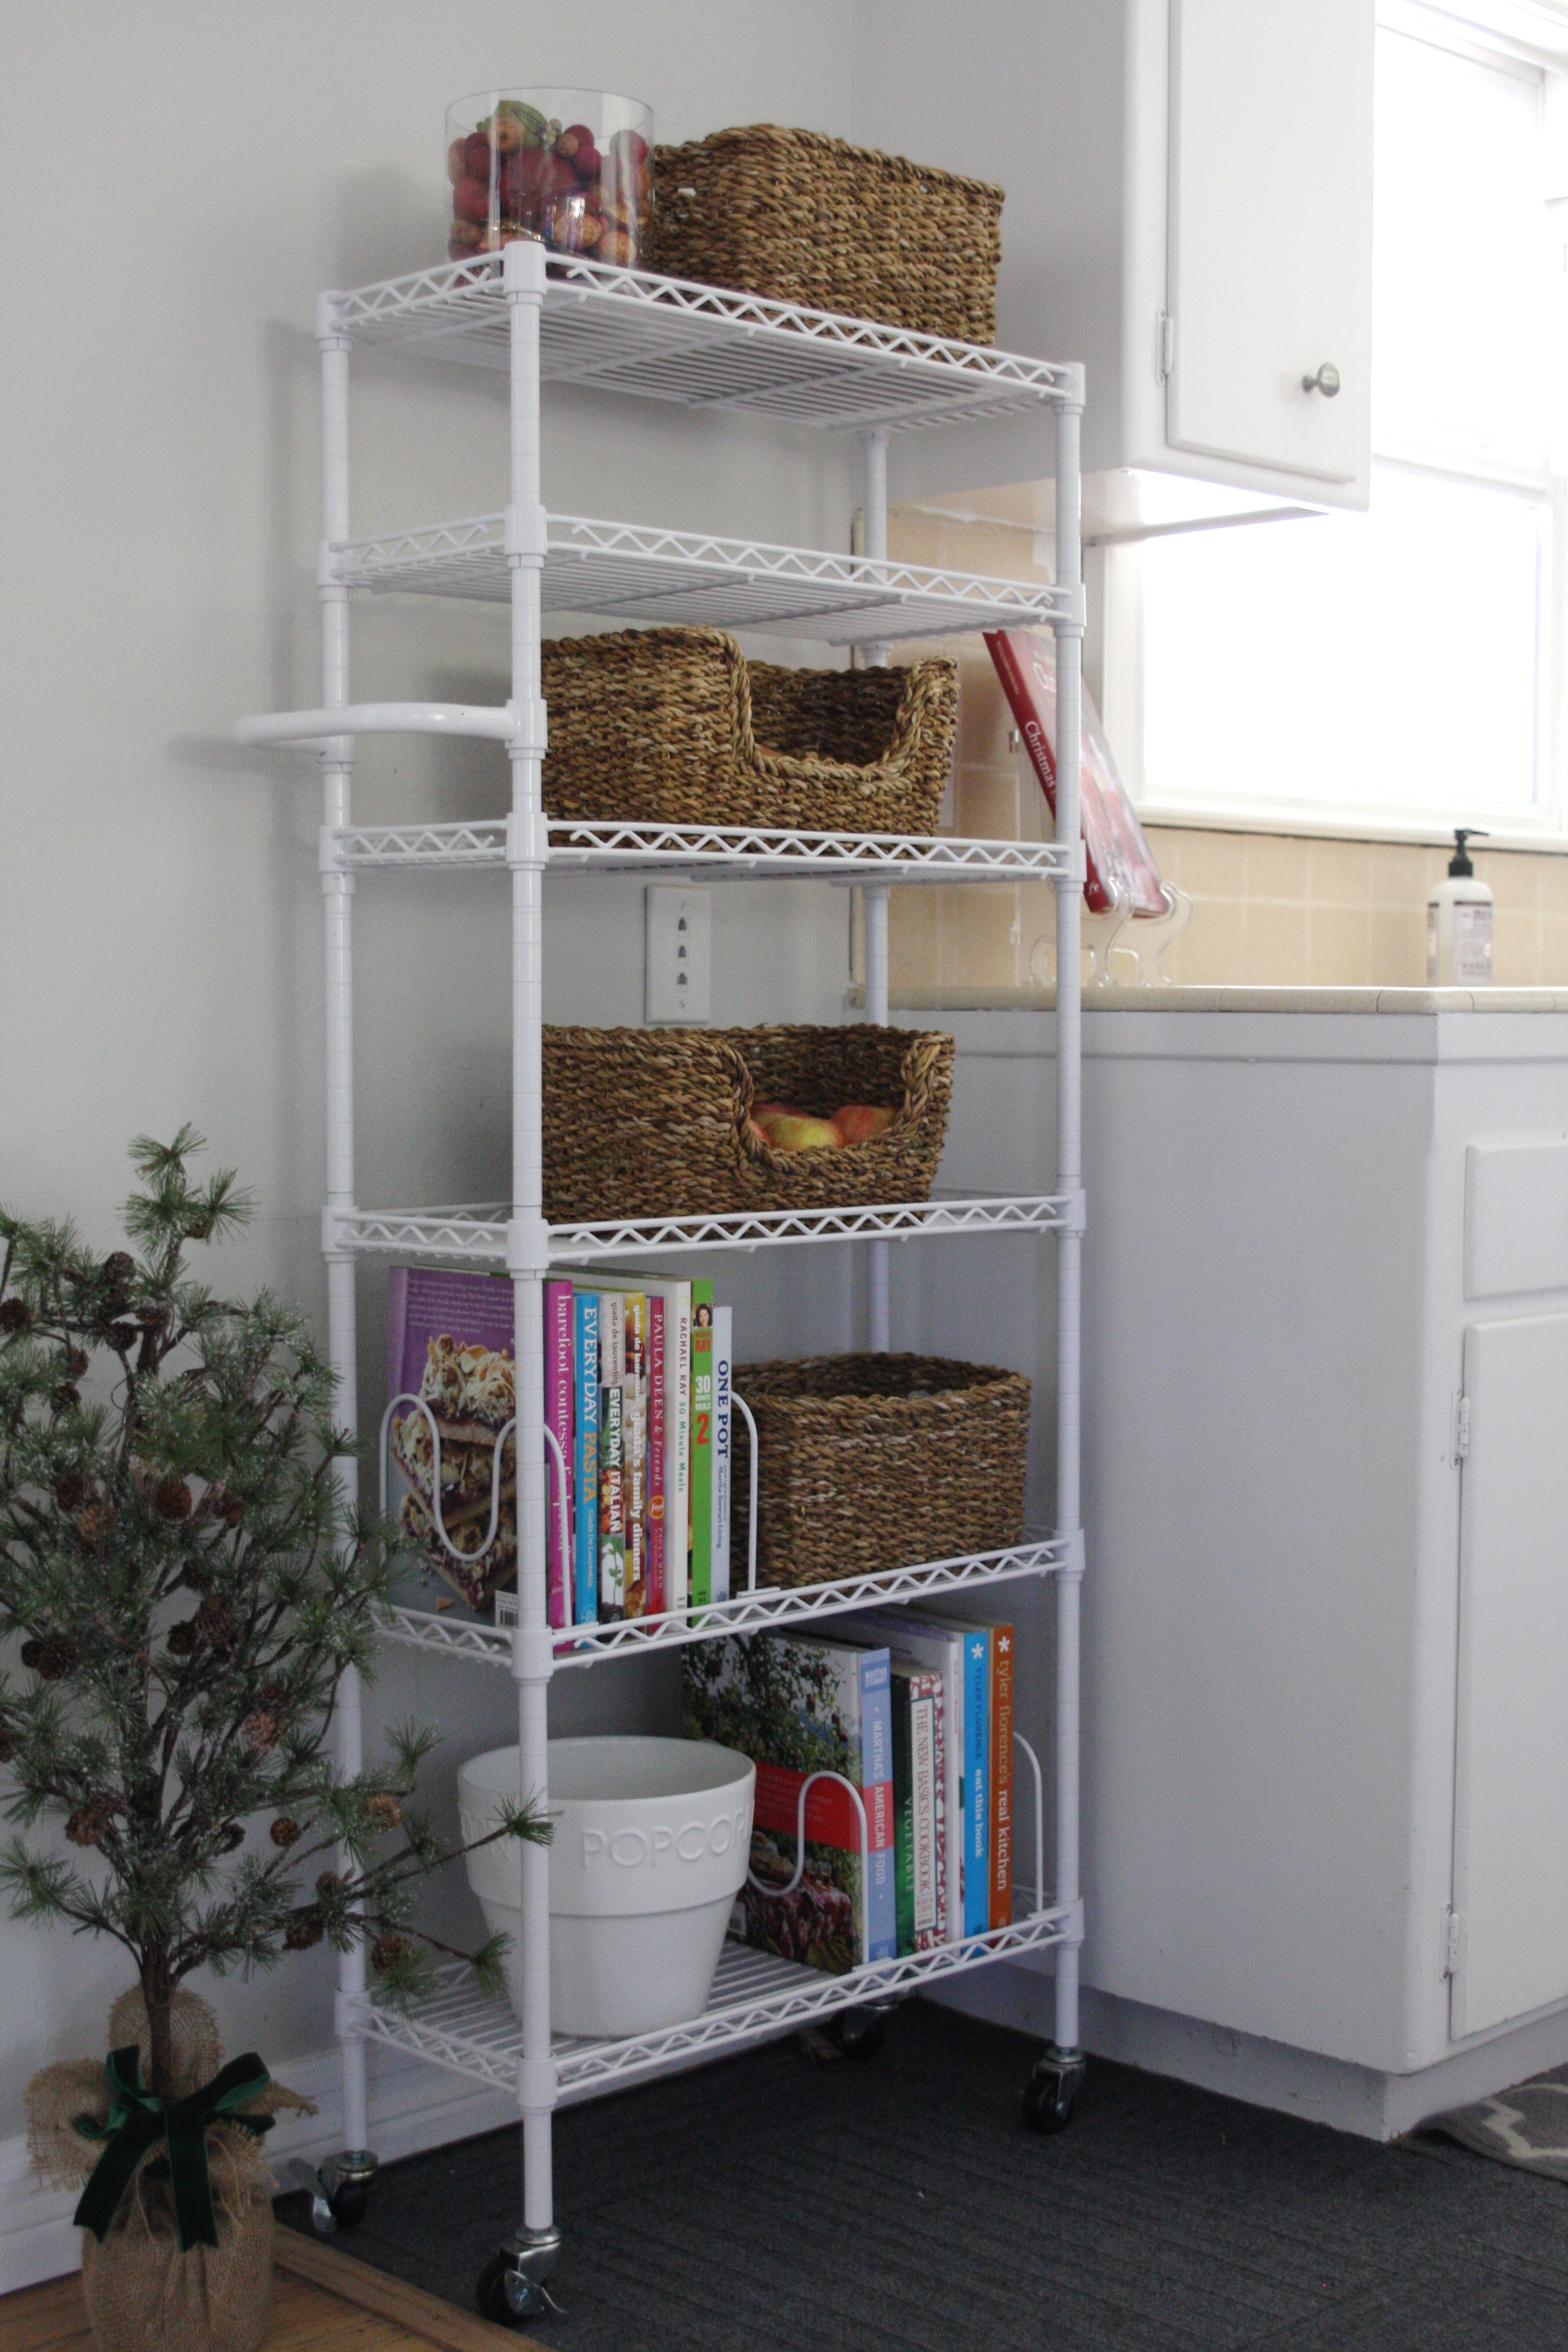 Small Space Kitchen Organizing: Add A Shelf with Baskets - Simply Organized